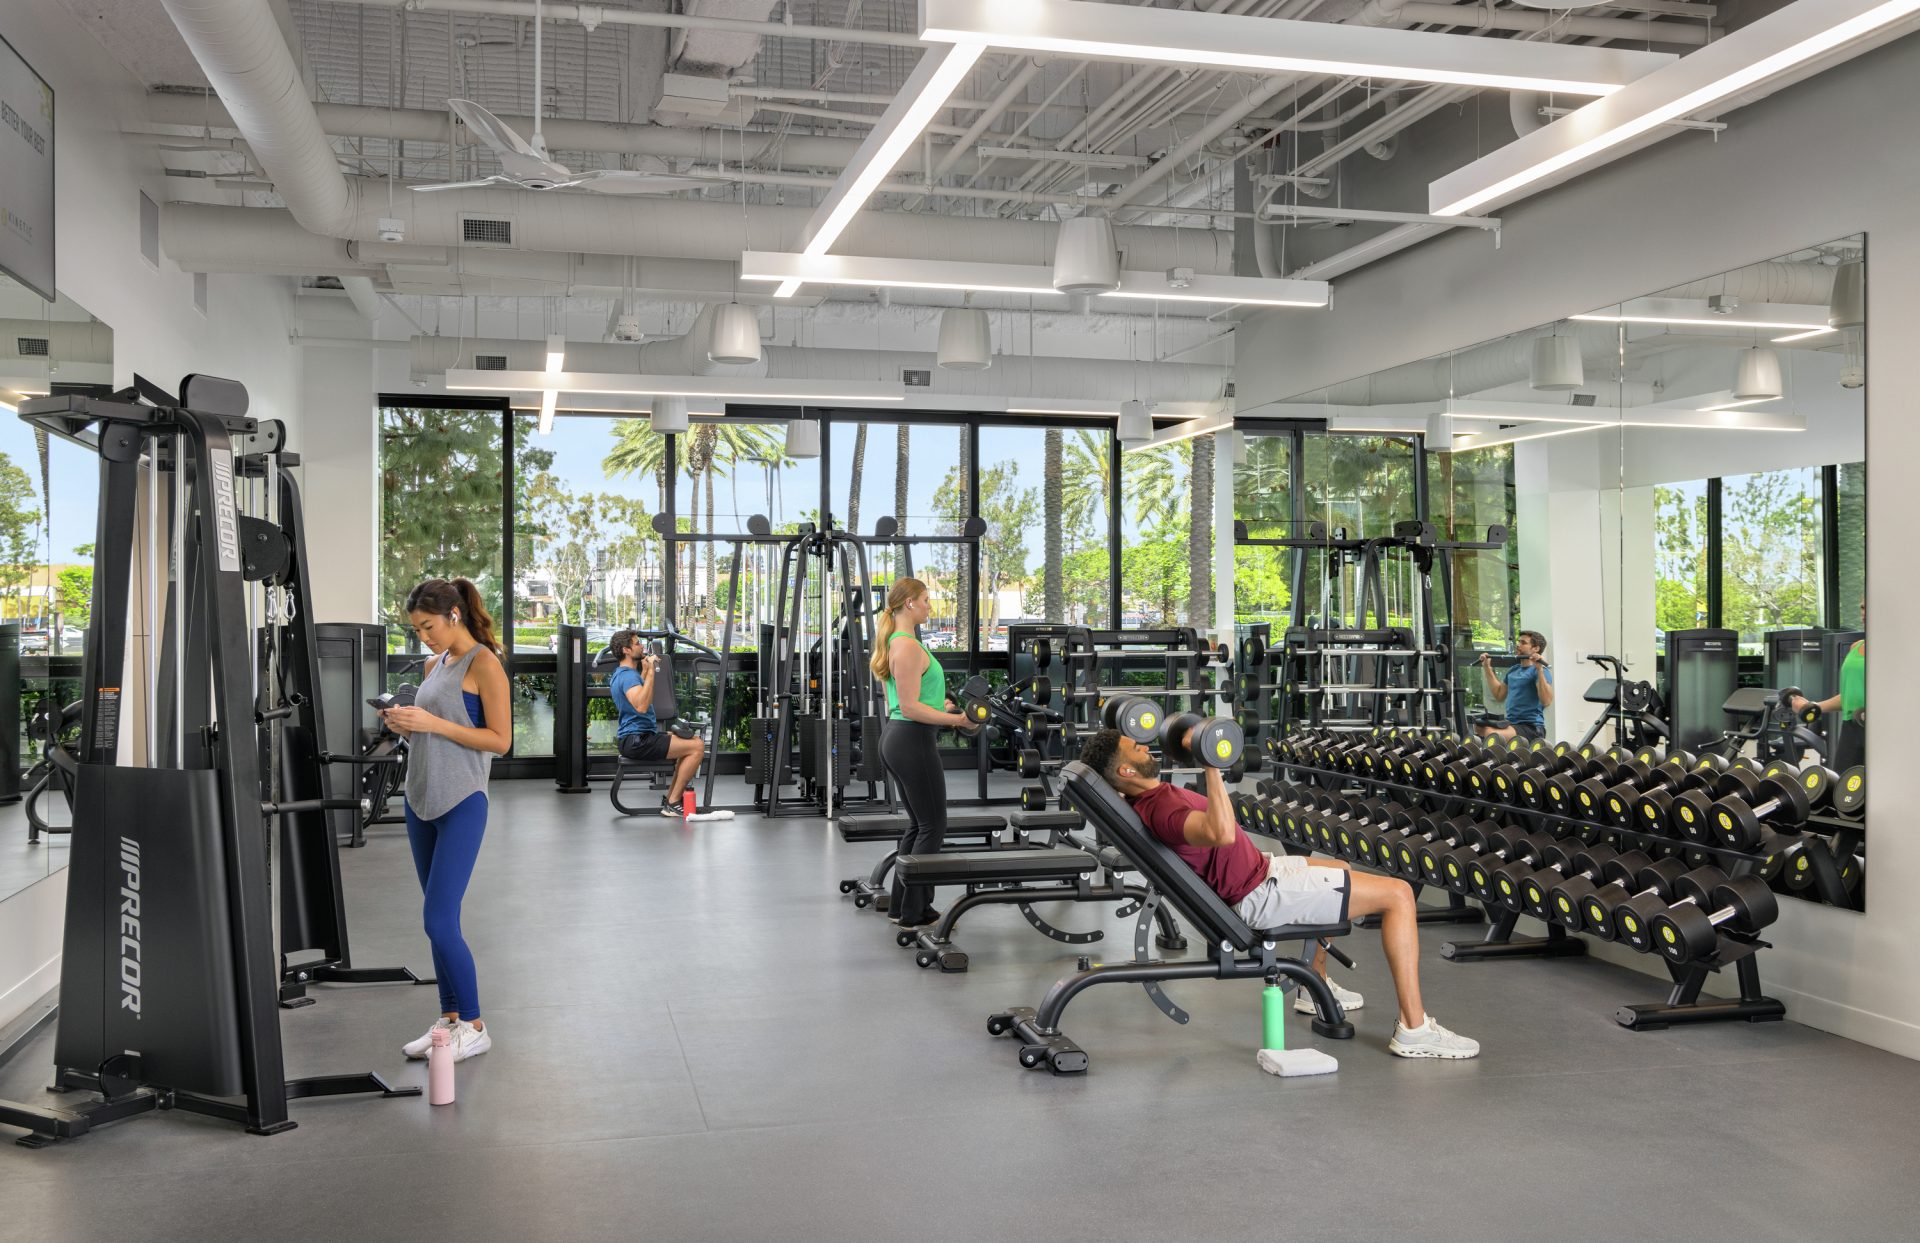 Interior photography of Kinetic fitness center at 675 Anton, suite 100 at Pacific Arts Plaza